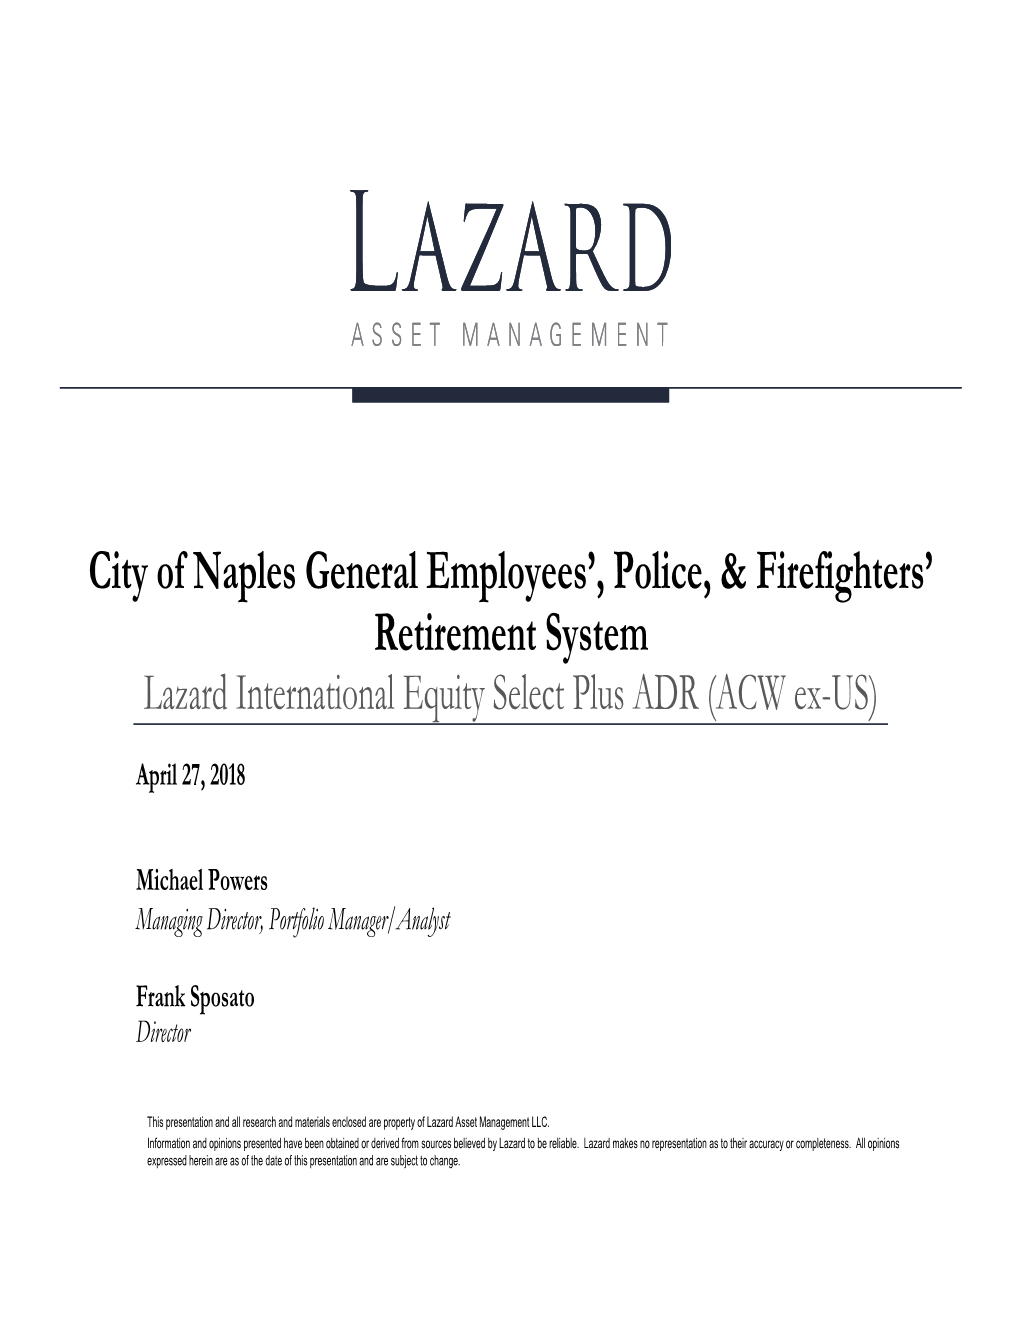 City of Naples General Employees', Police, & Firefighters' Retirement